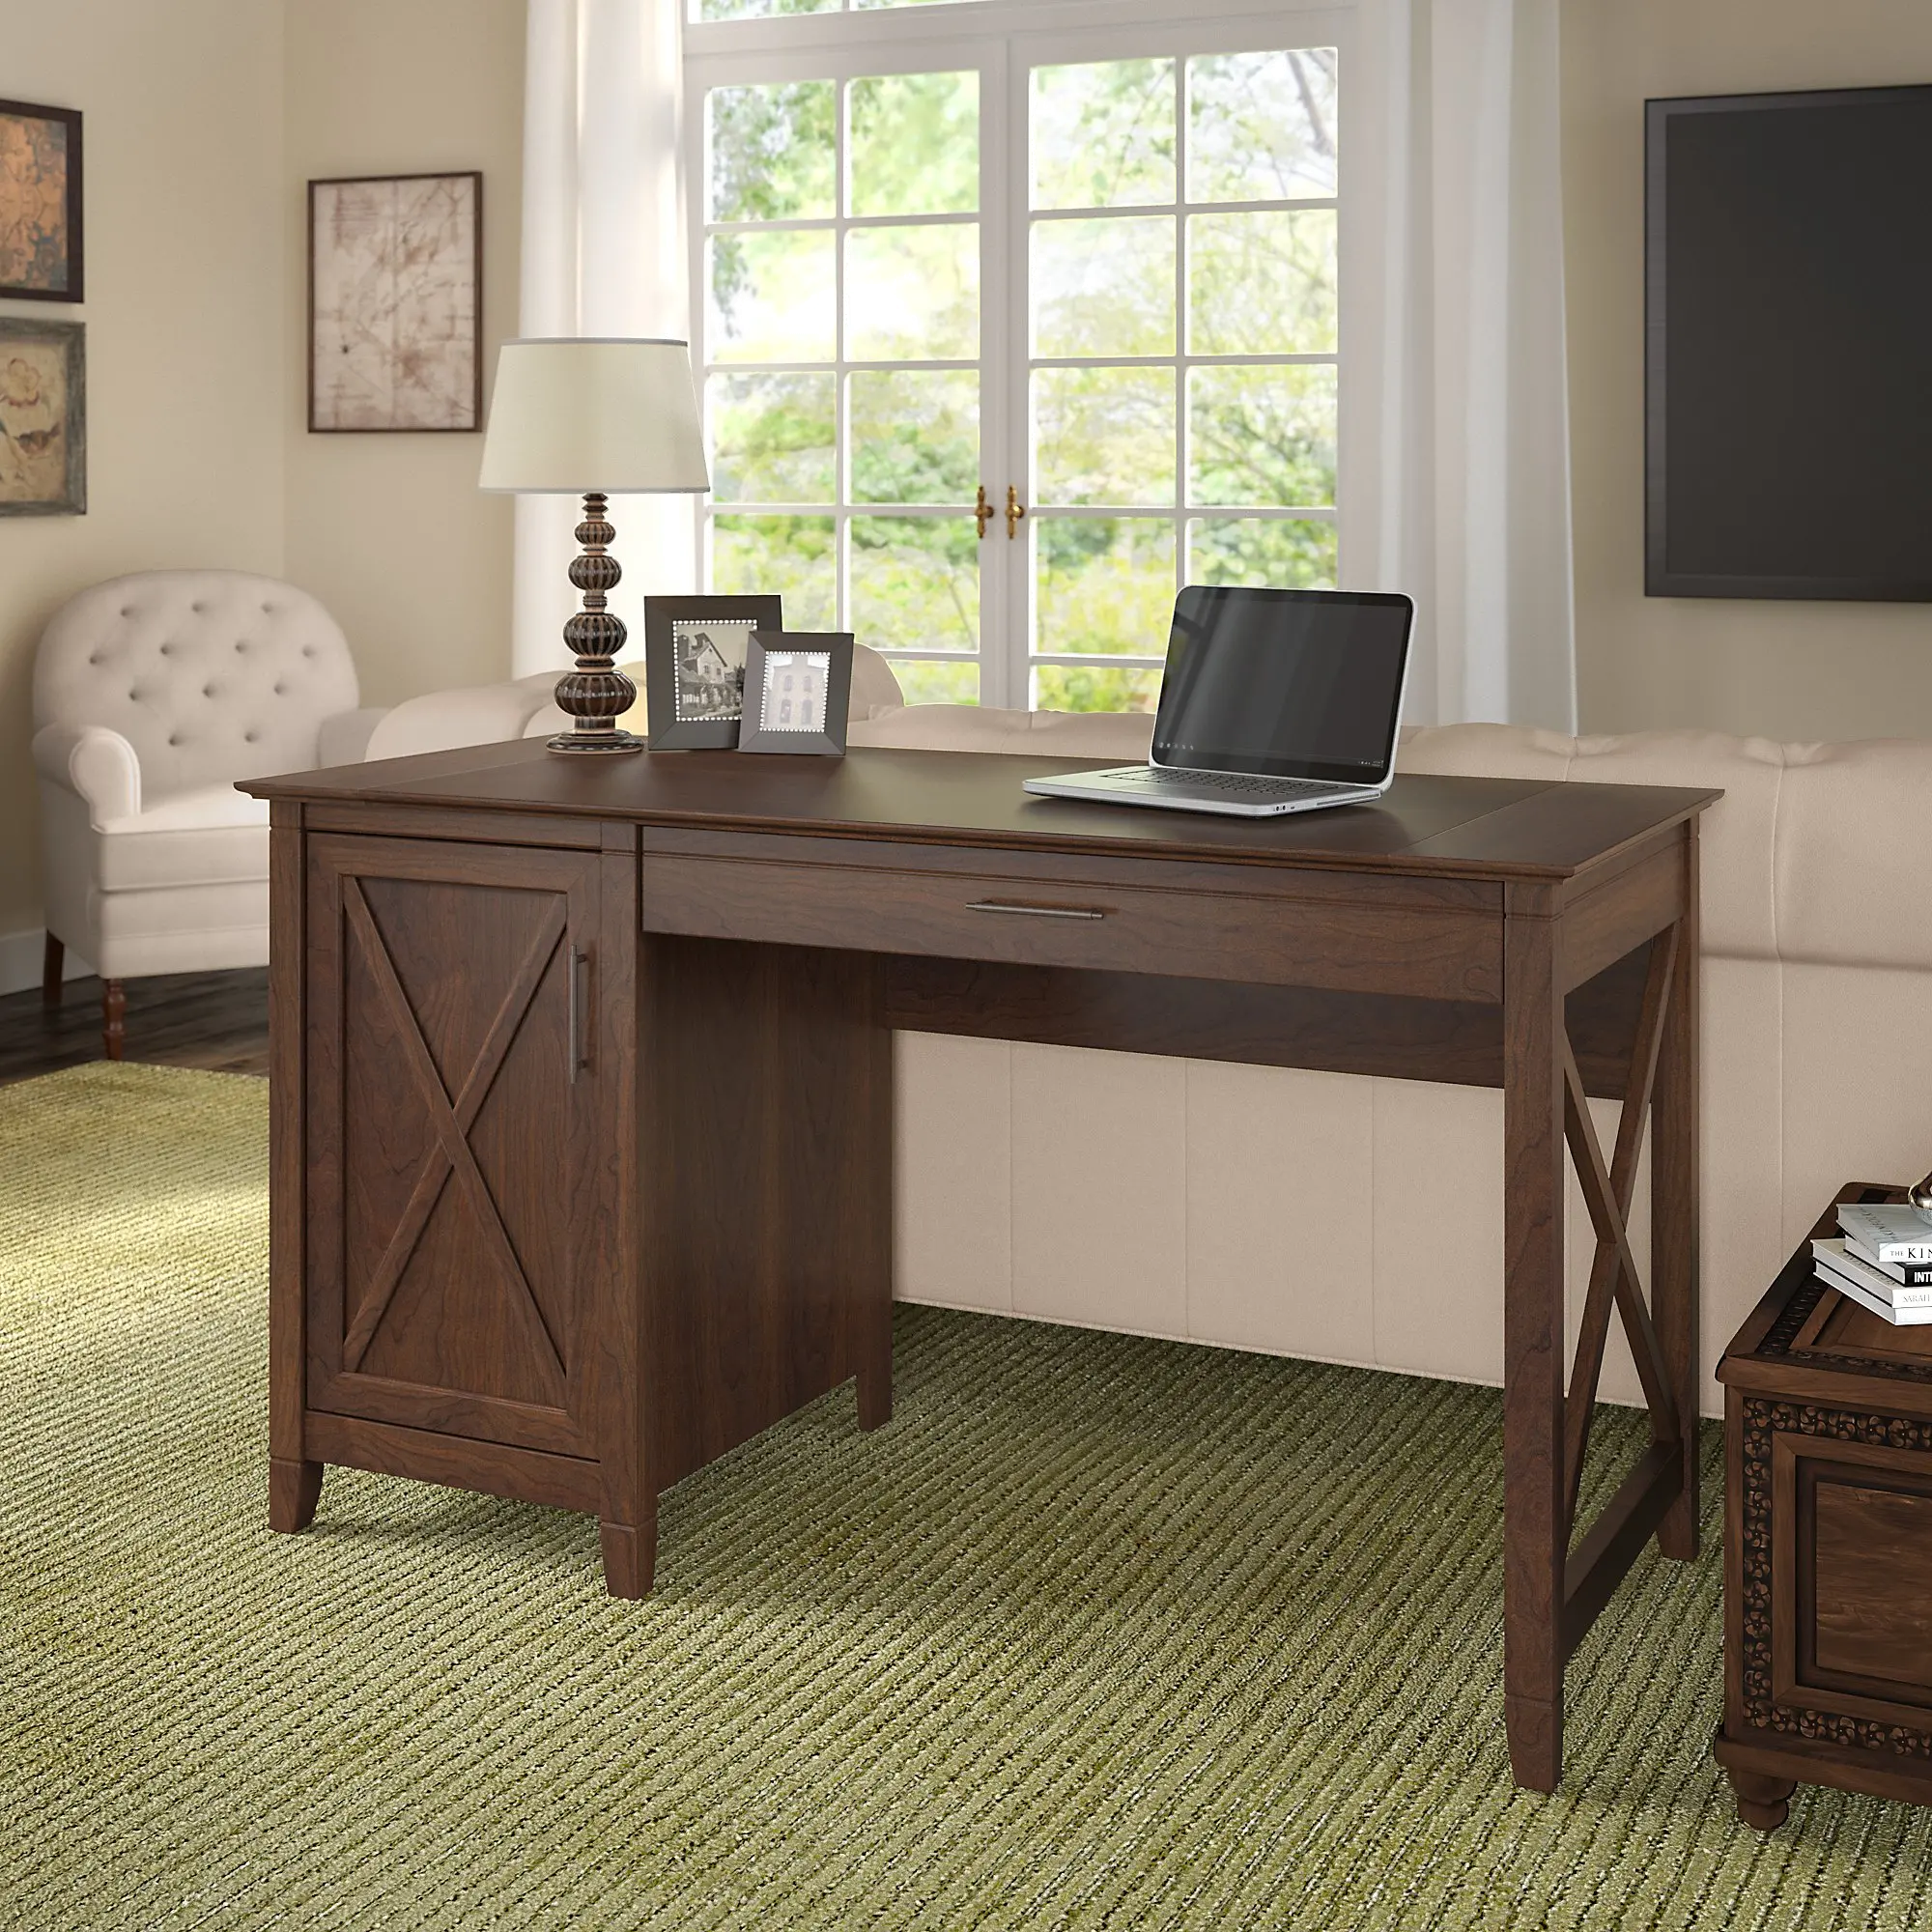 KWD154BC-03 Key West Cherry Brown Casual 54 Inch Office Desk - sku KWD154BC-03